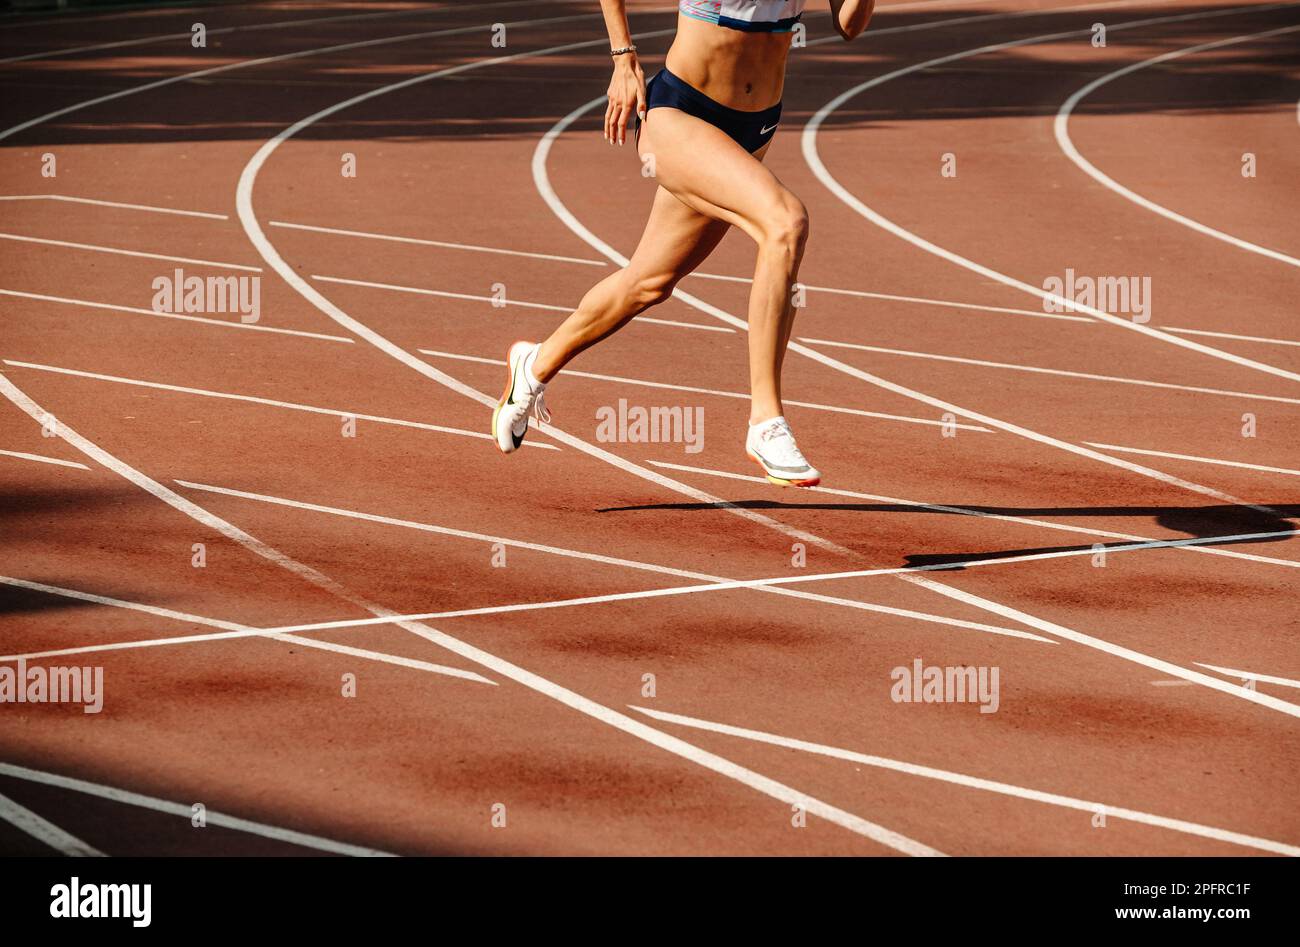 legs female athlete running race at stadium, spikes shoes for running Nike, sports photo Stock Photo